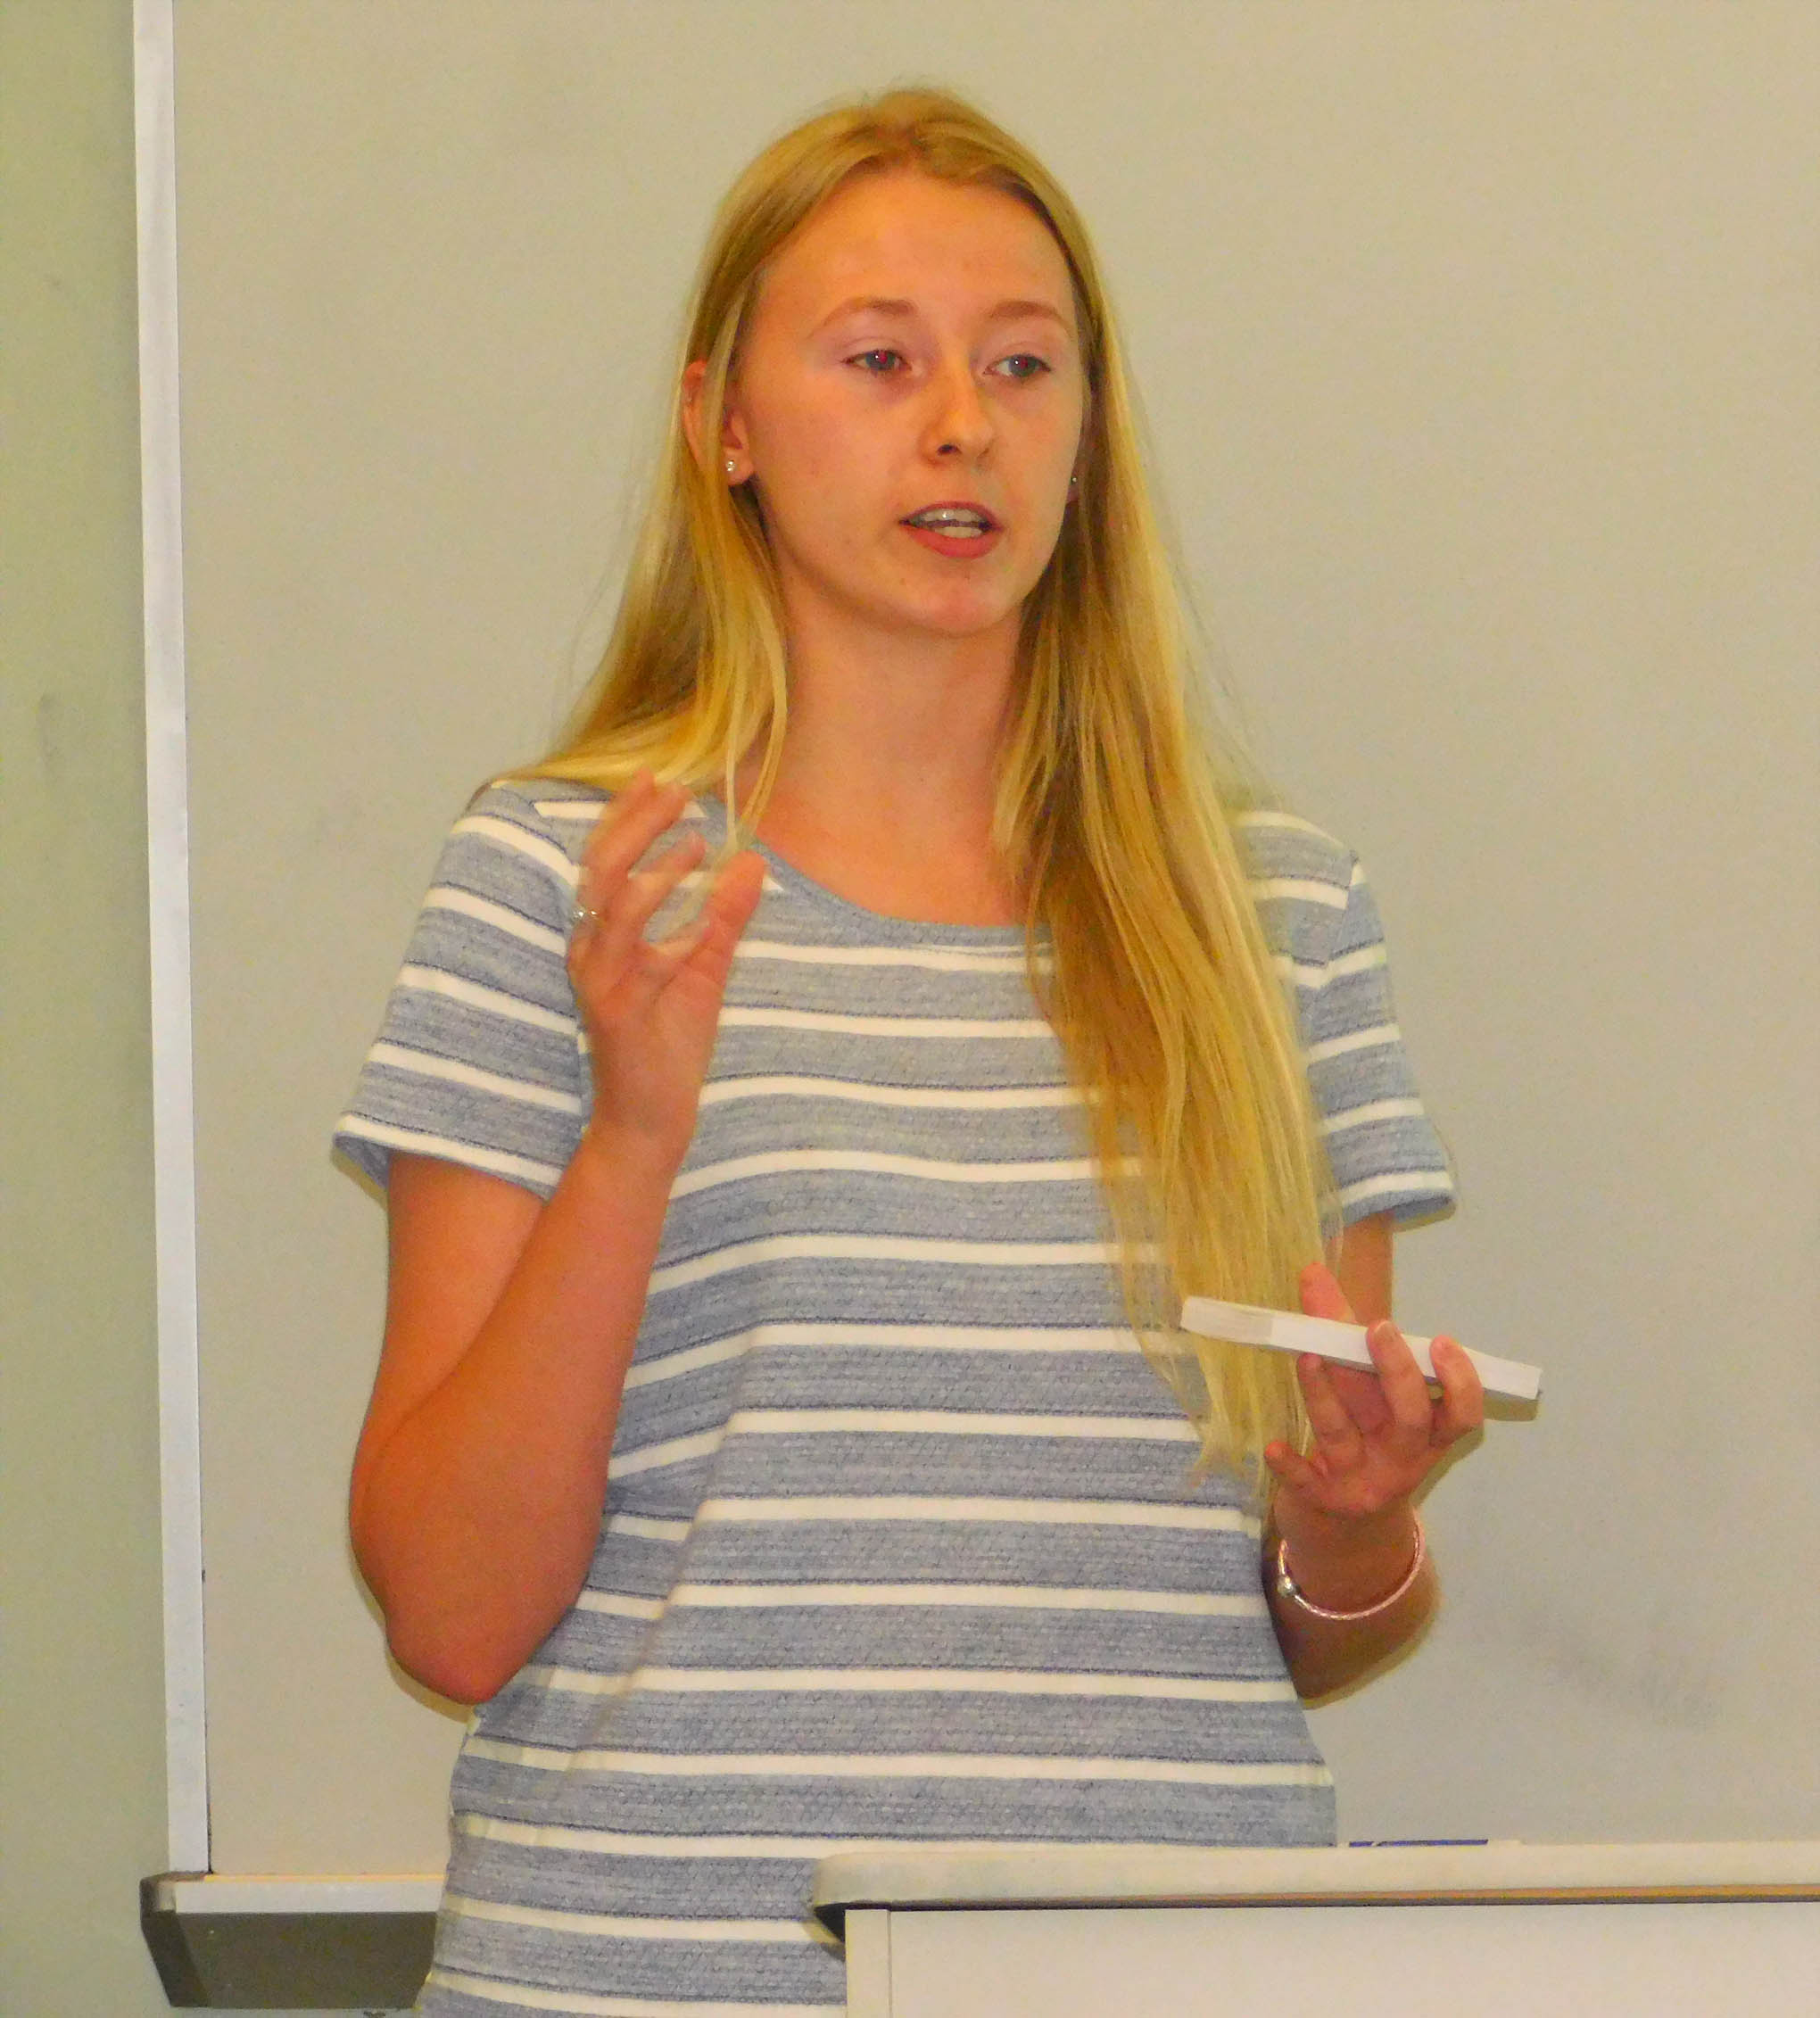 CCCC Honors Scholars student presents project